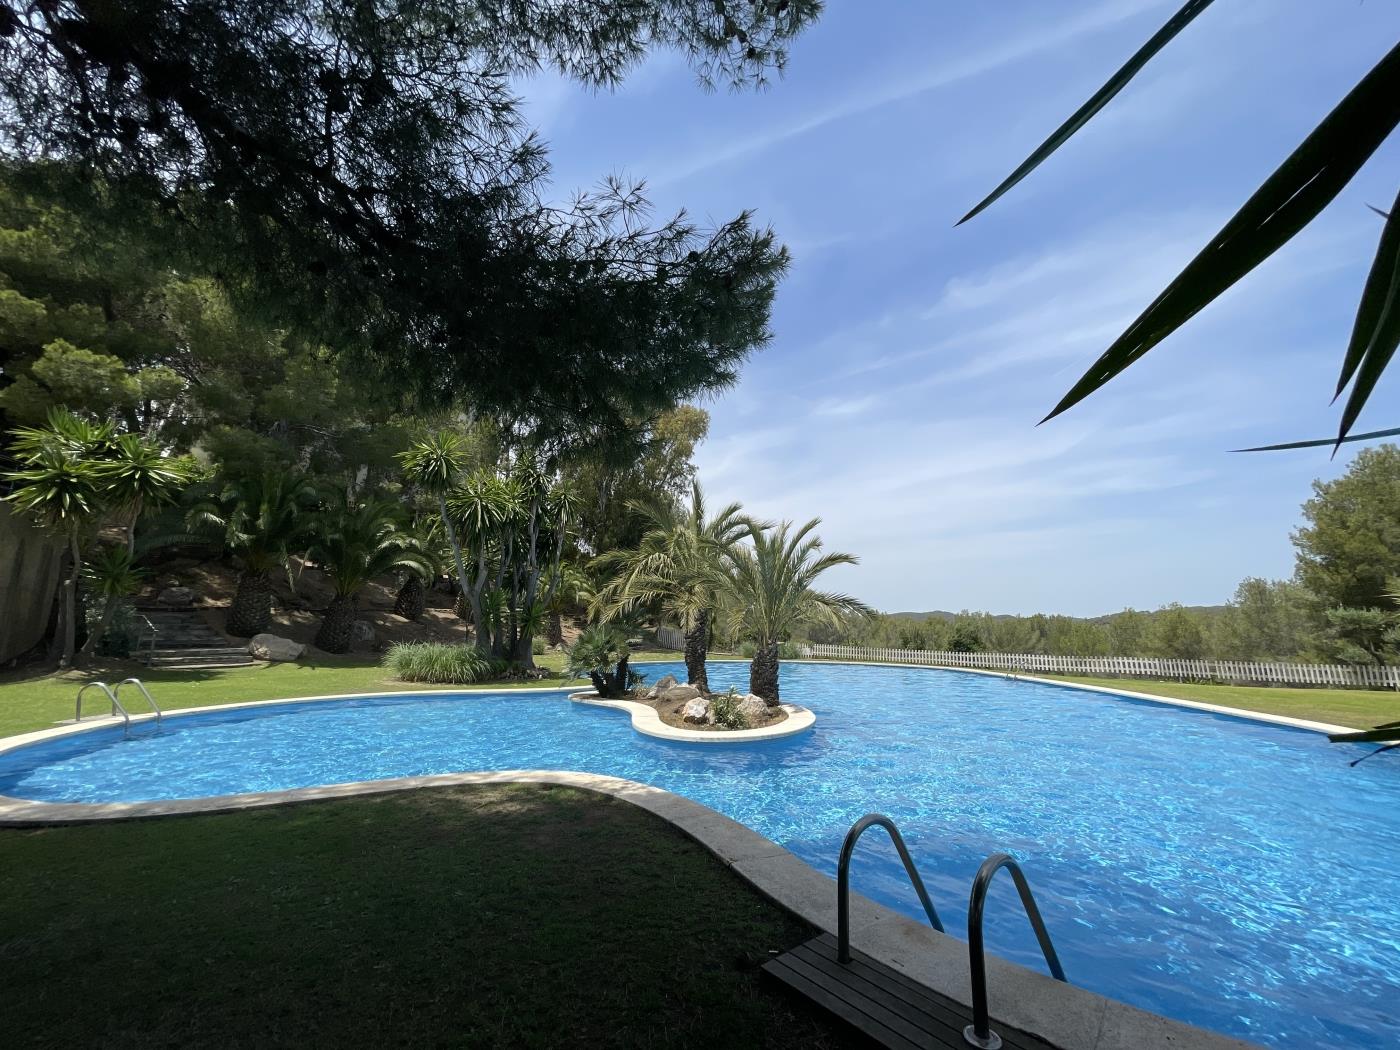 PANORAMIC VILLA BY BLAUSITGES all you can dream of for your holidays in Sitges in SITGES